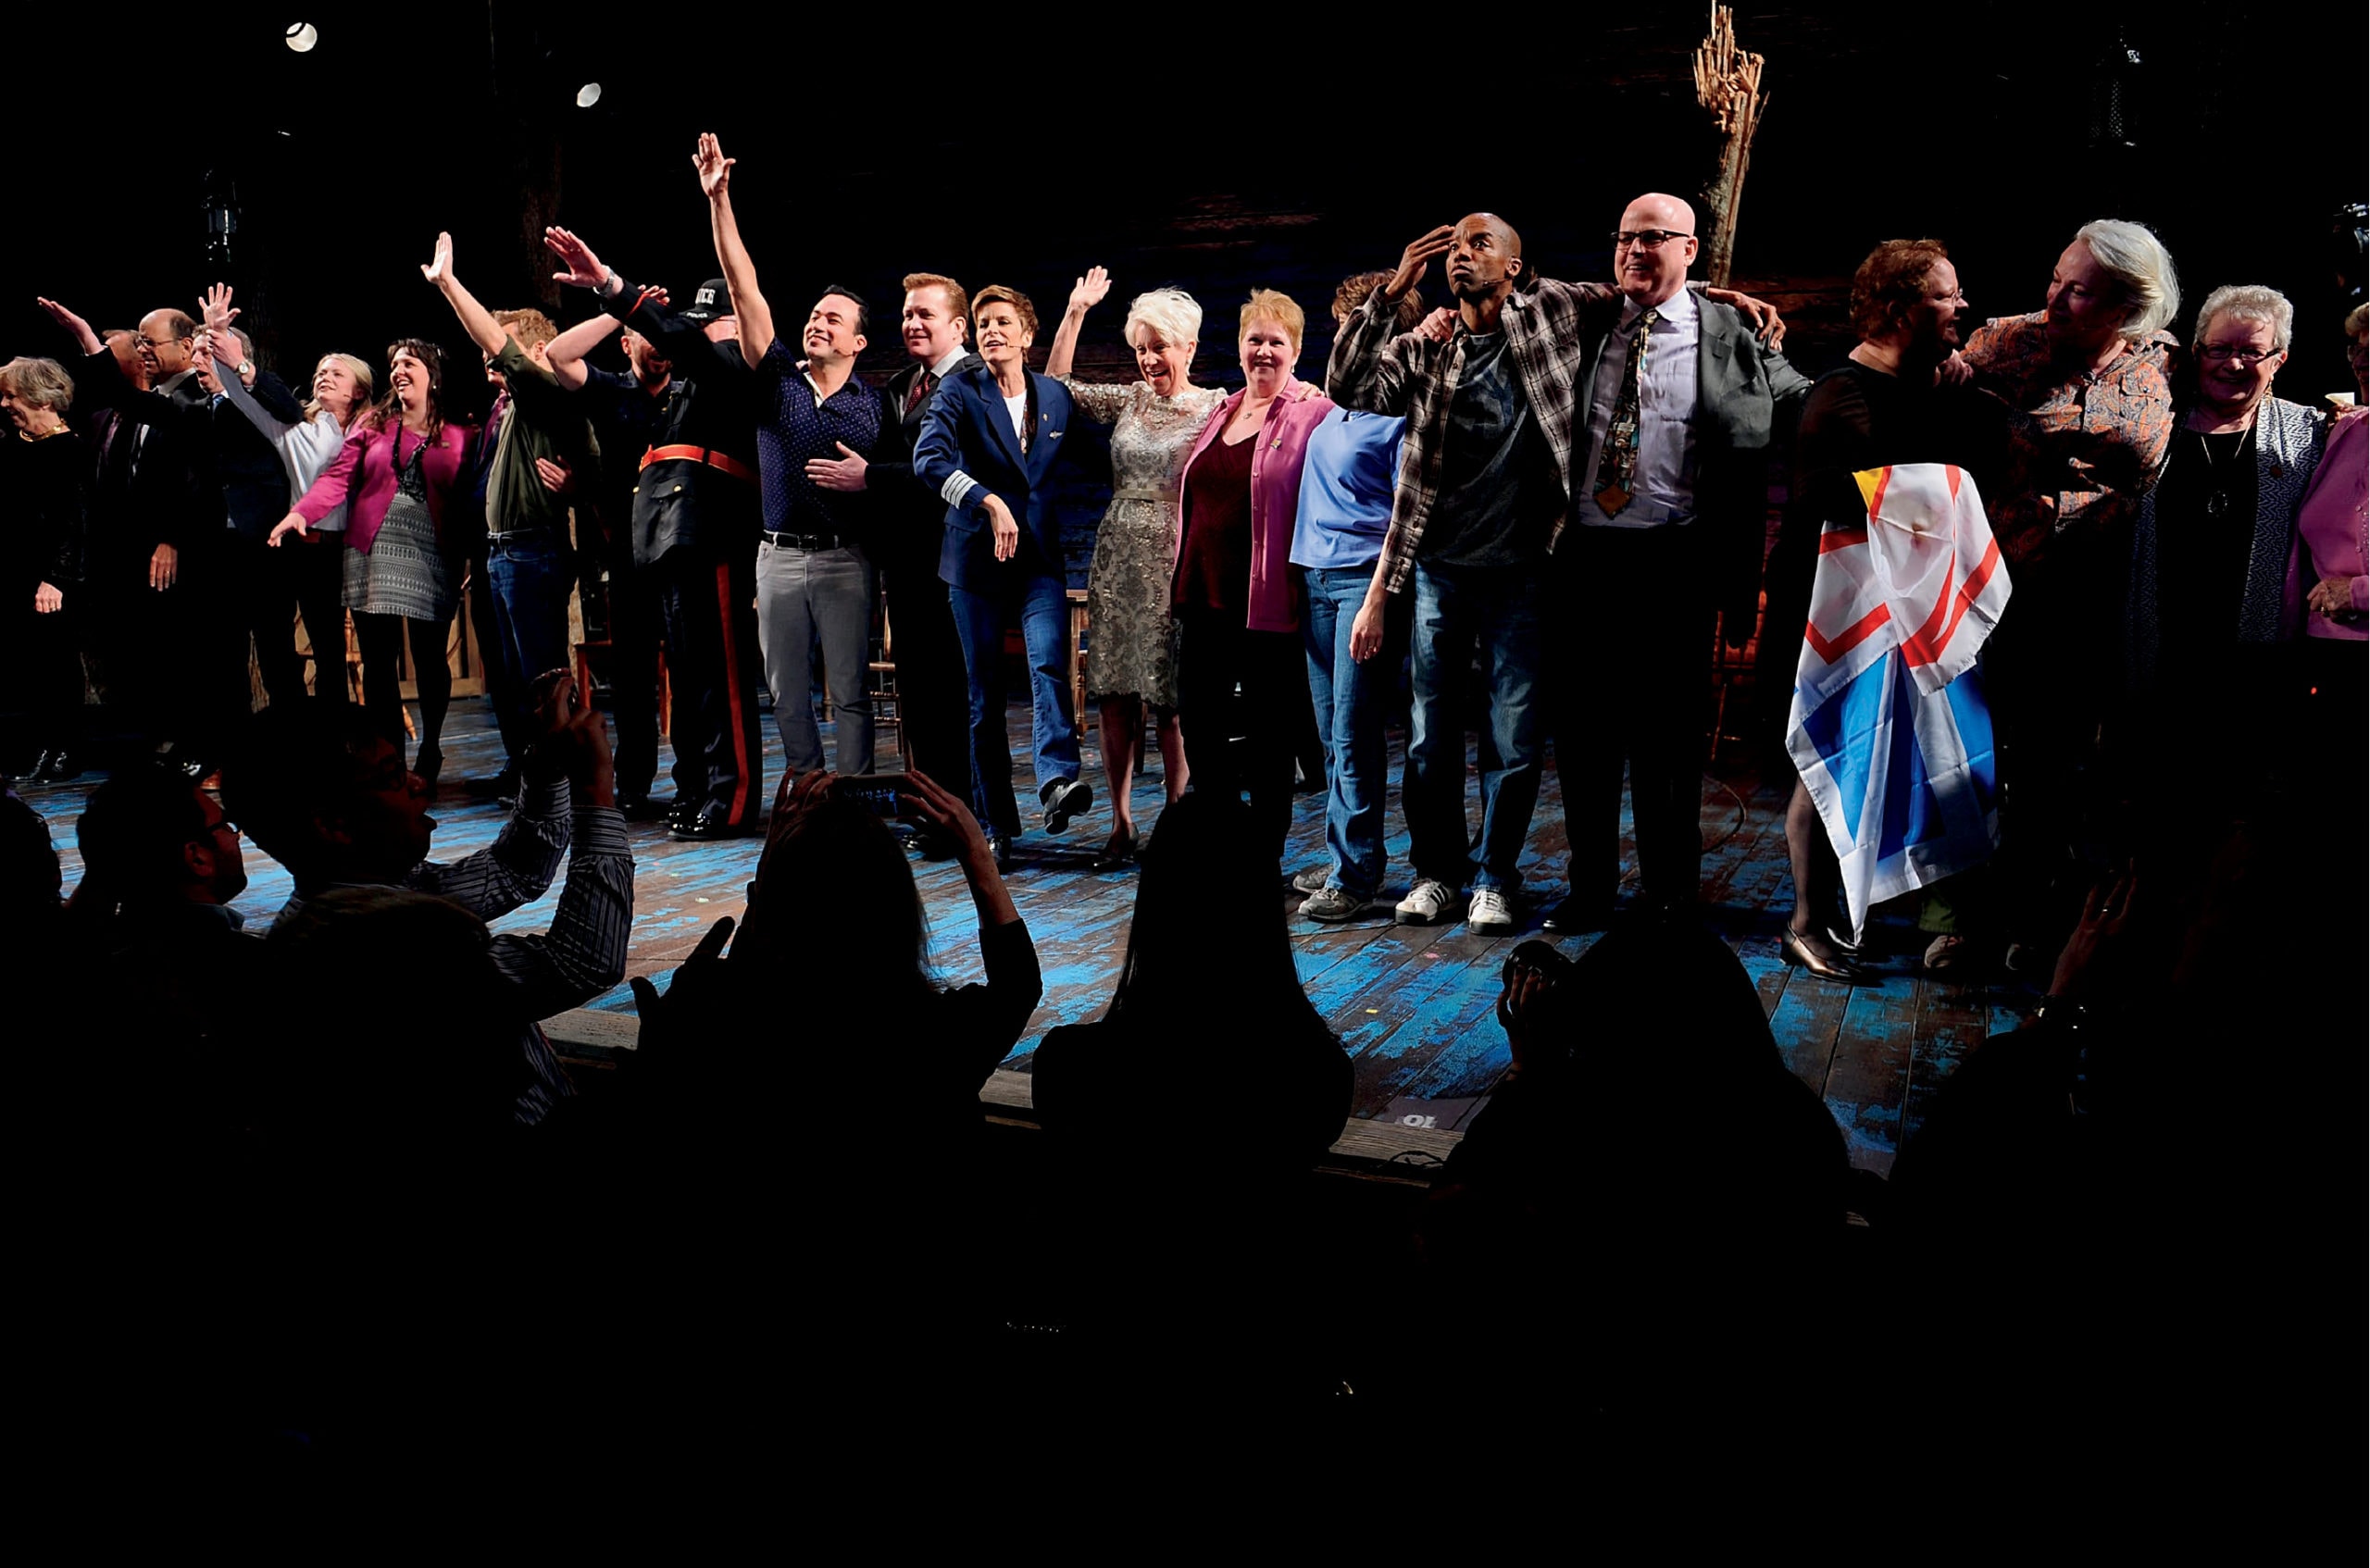 Come From Away on broadway in 2017. Image via Getty Images